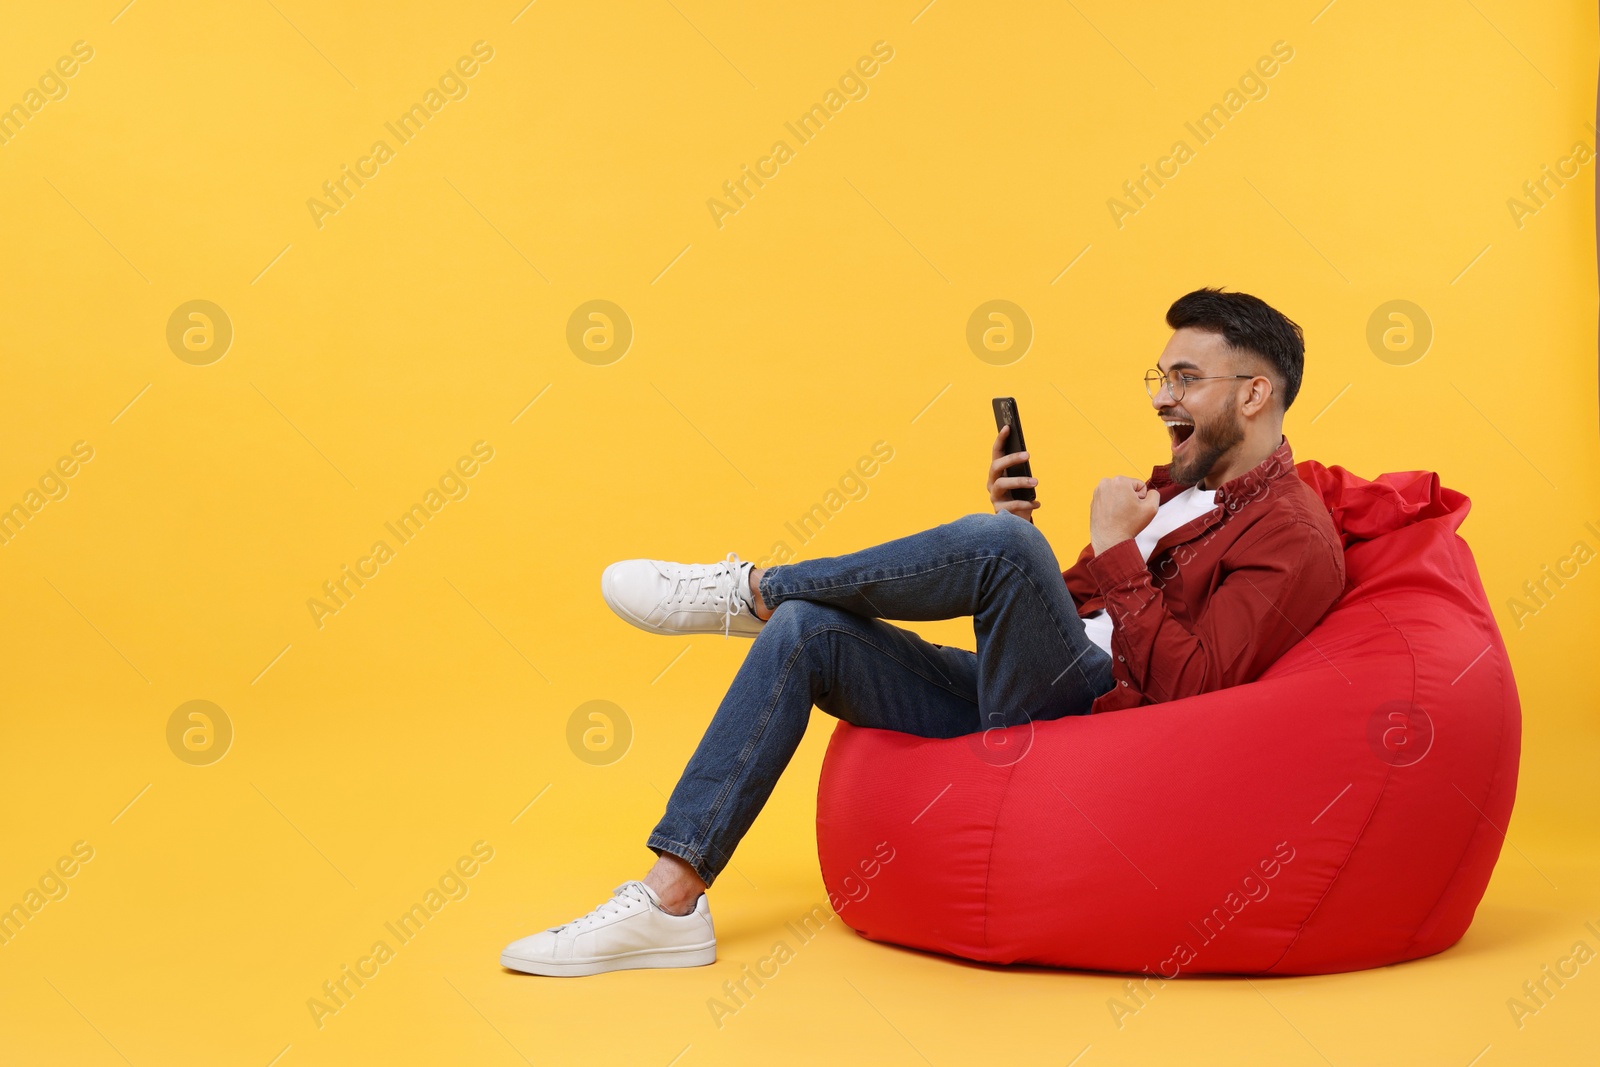 Photo of Happy young man using smartphone on bean bag chair against yellow background, space for text